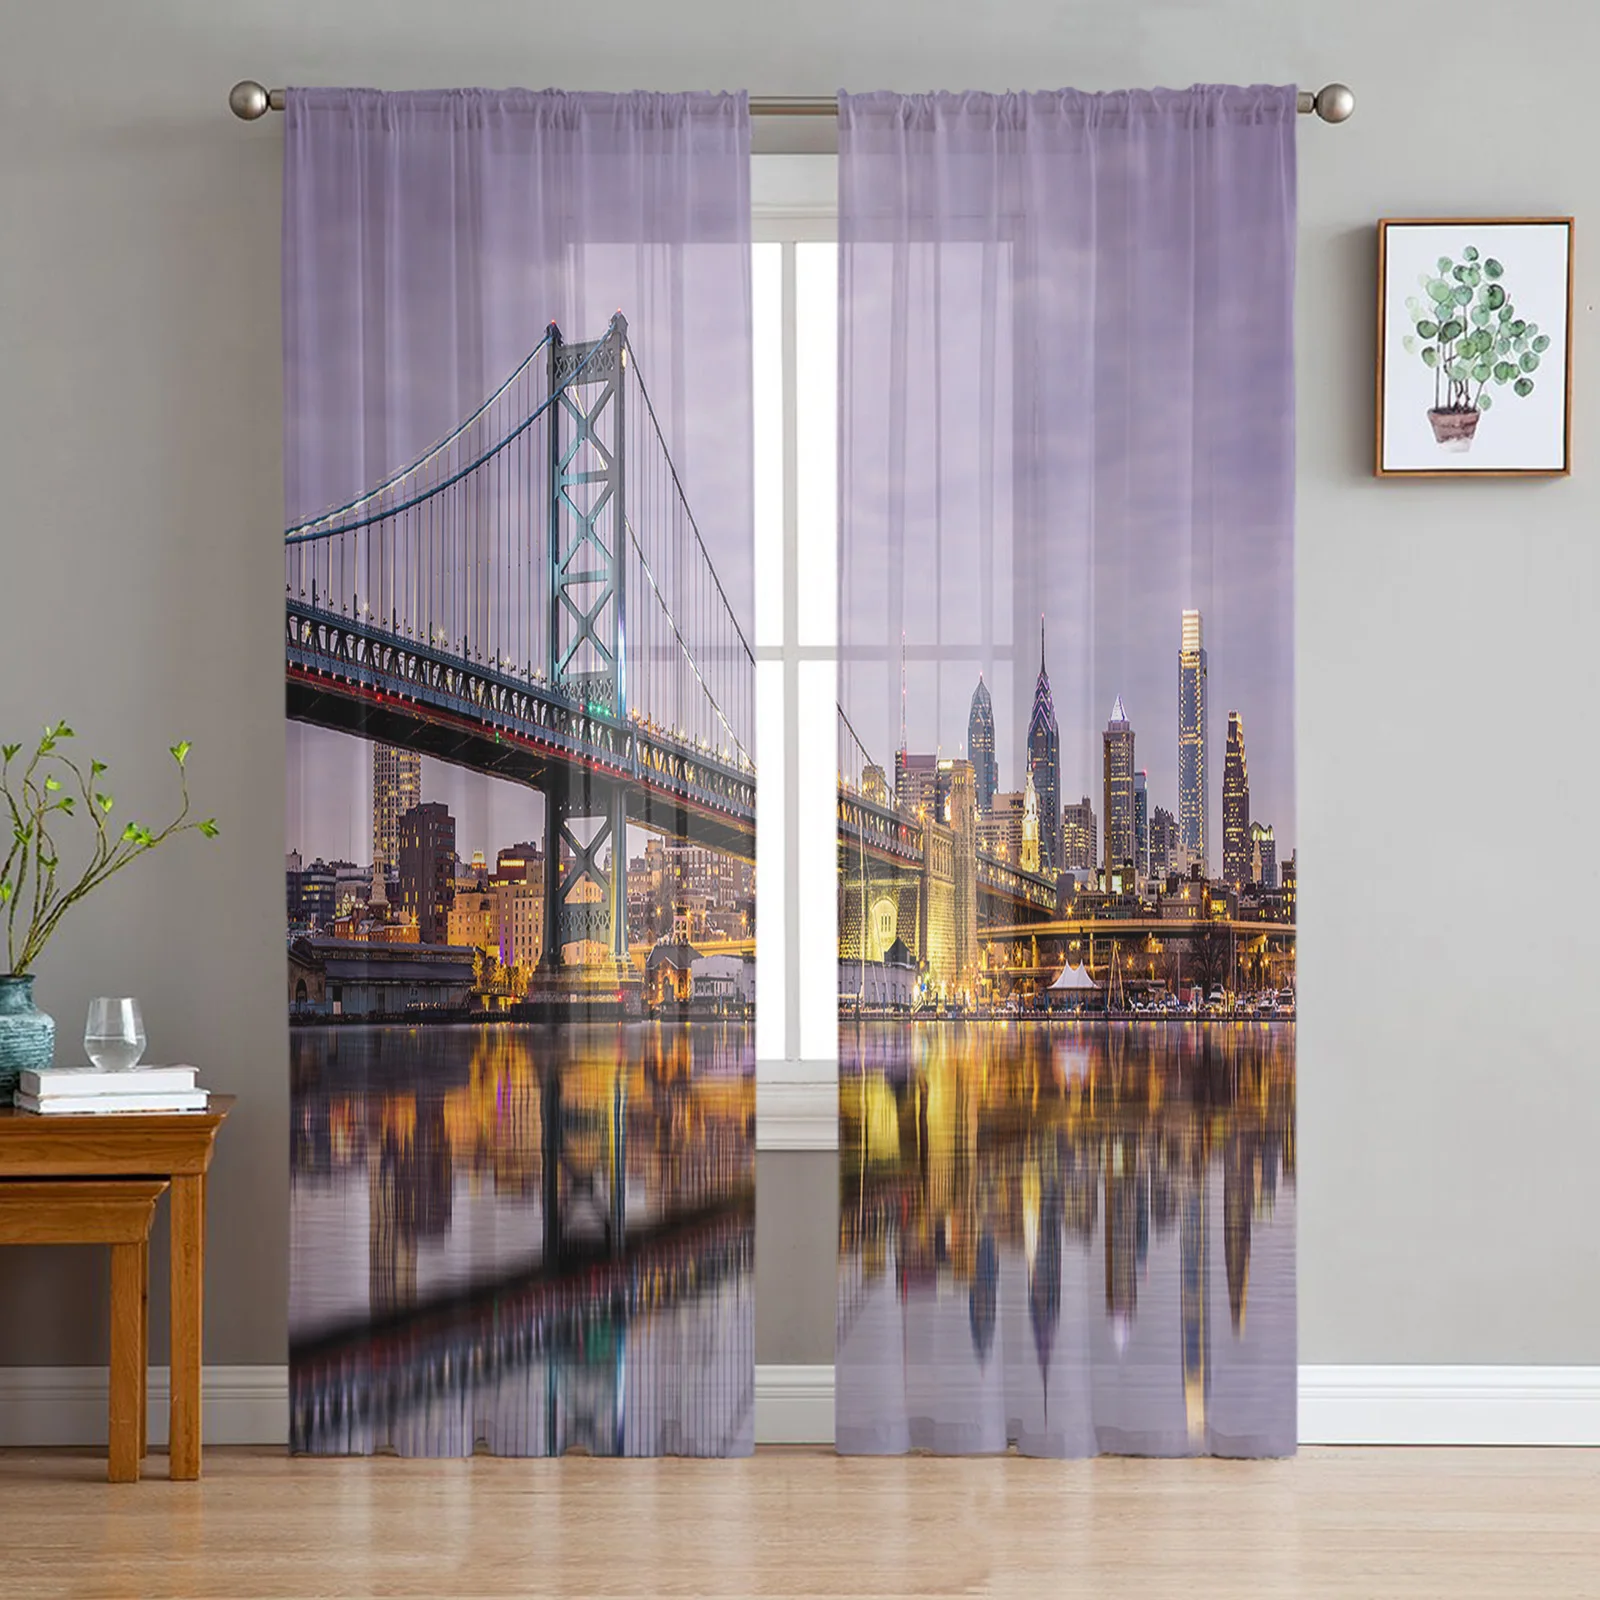 

United States Urban Bridge Scenery Tulle Sheer Window Curtains for Living Room Kitchen Children Bedroom Voile Hanging Curtain